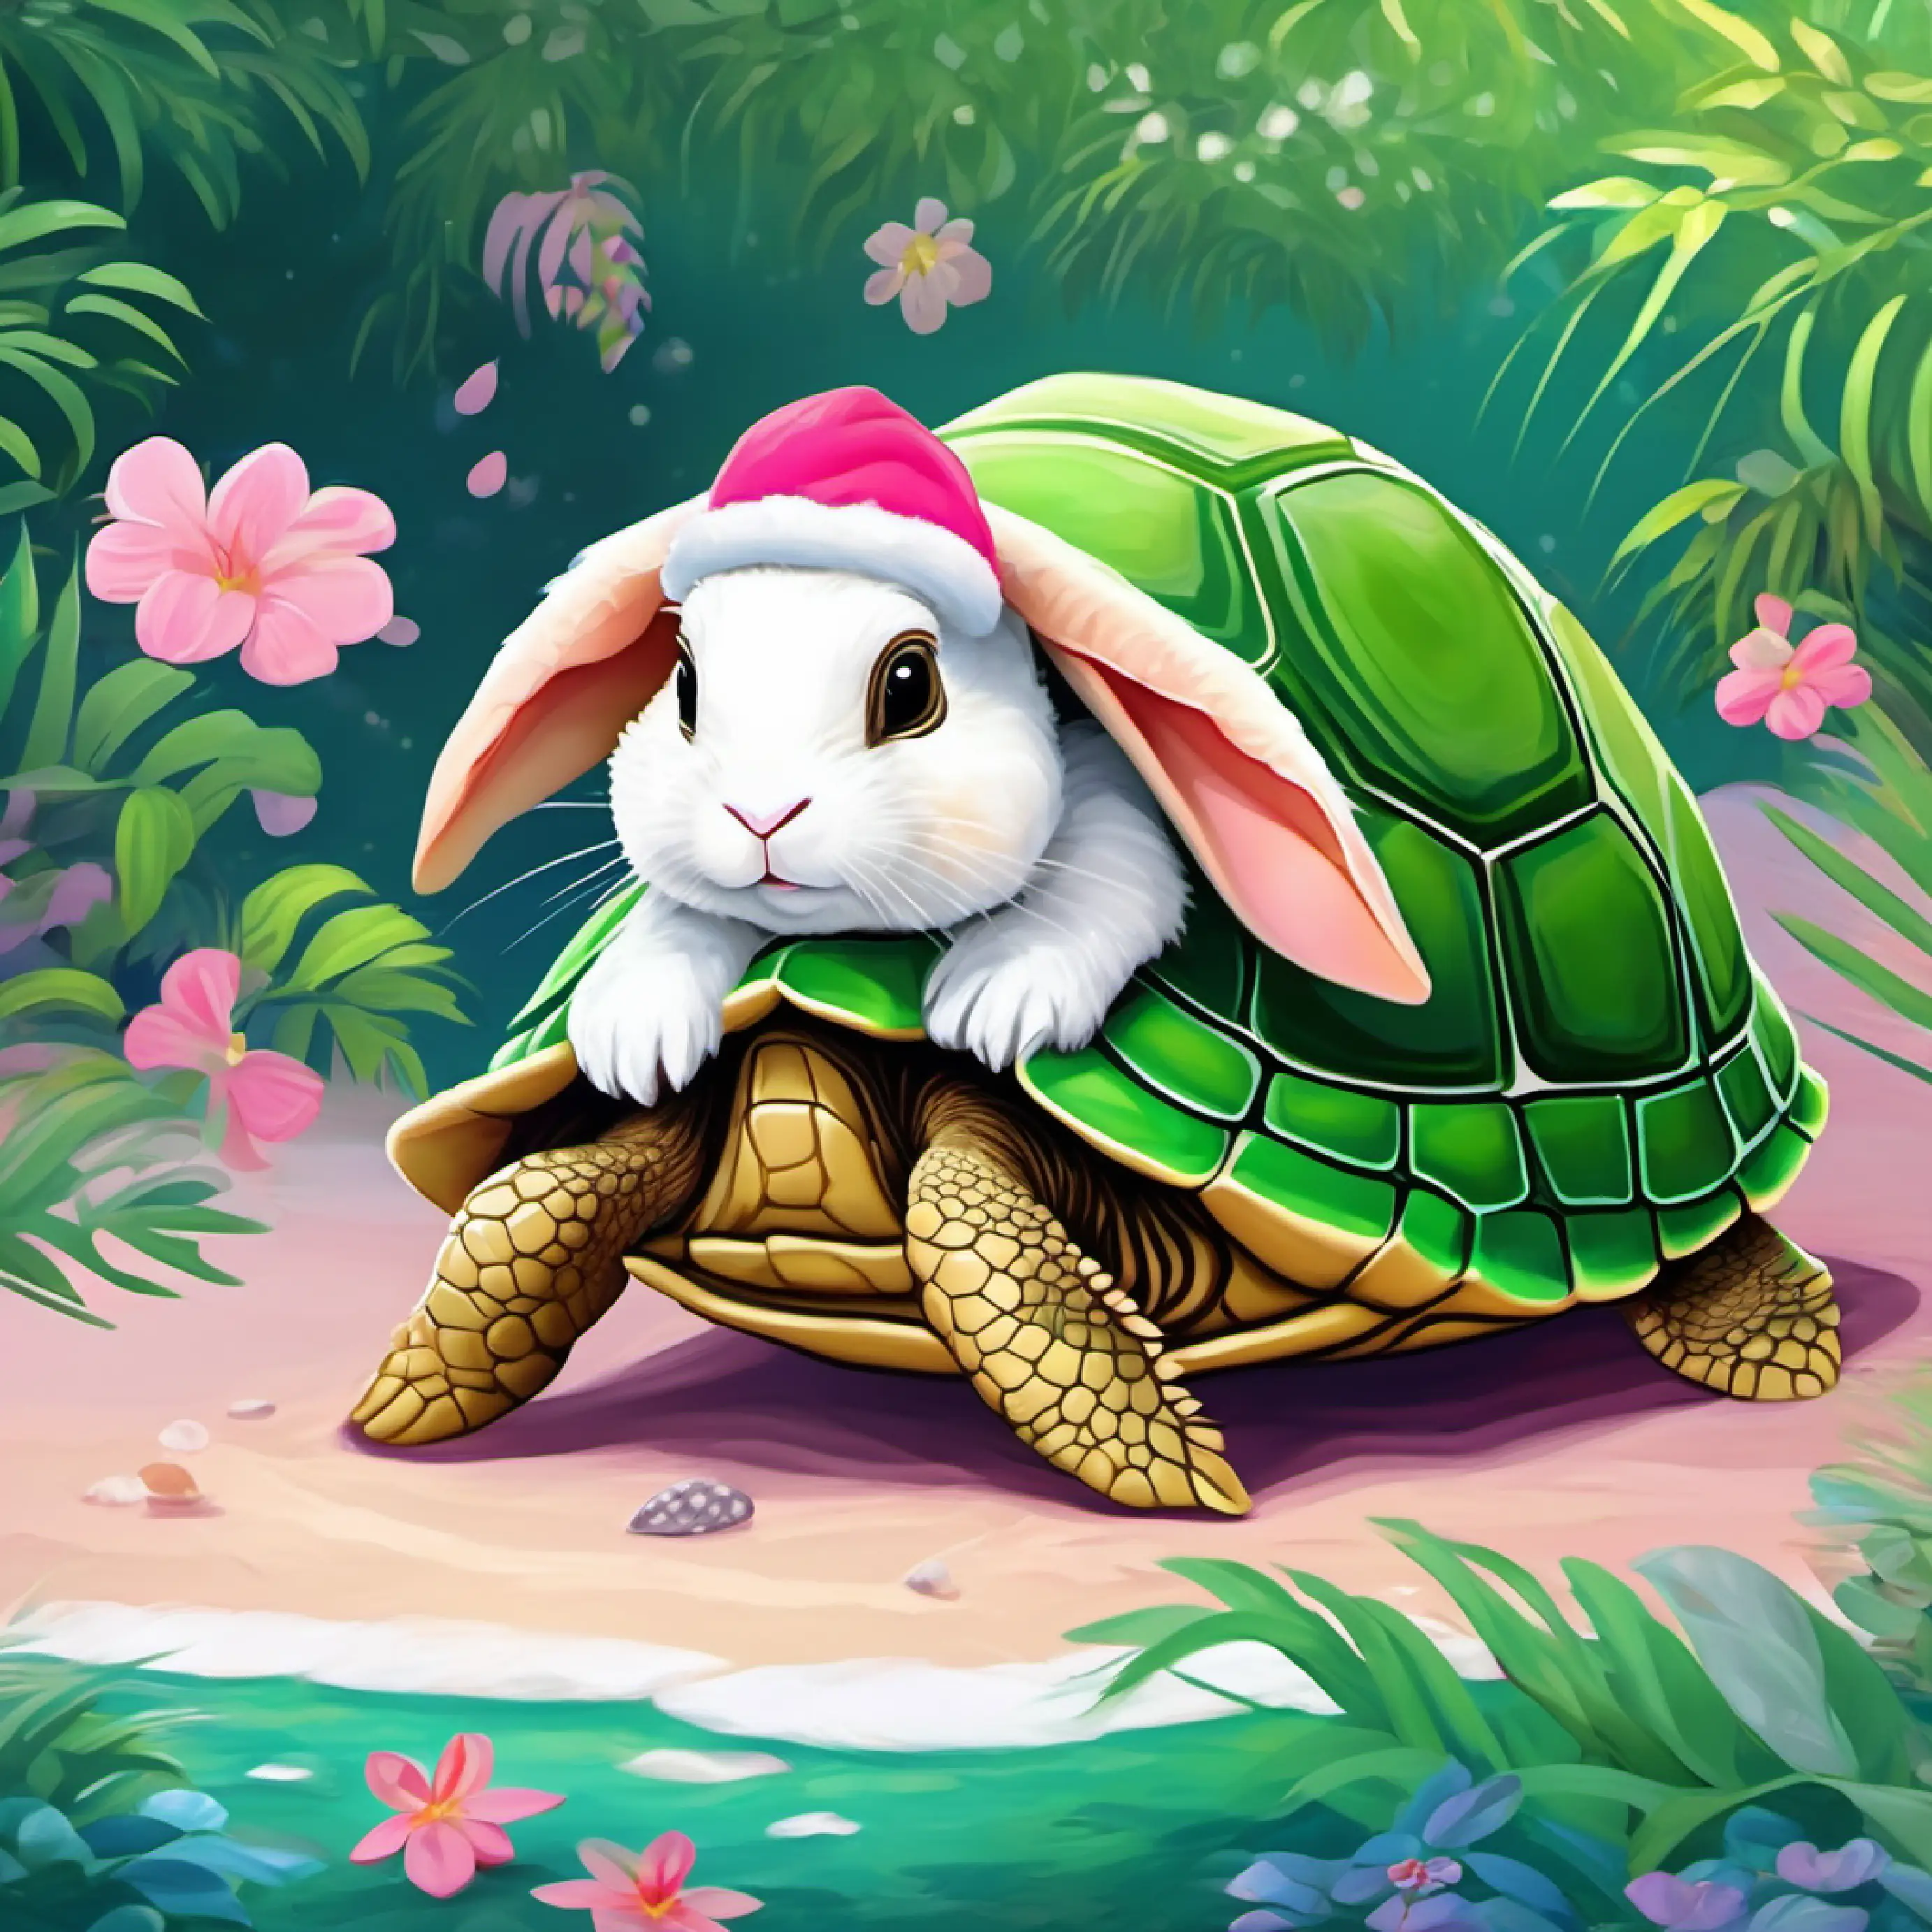 Green turtle, wise eyes, brown shell's burrow is rebuilt; Bashful rabbit, white fur, soft pink nose's foot healed